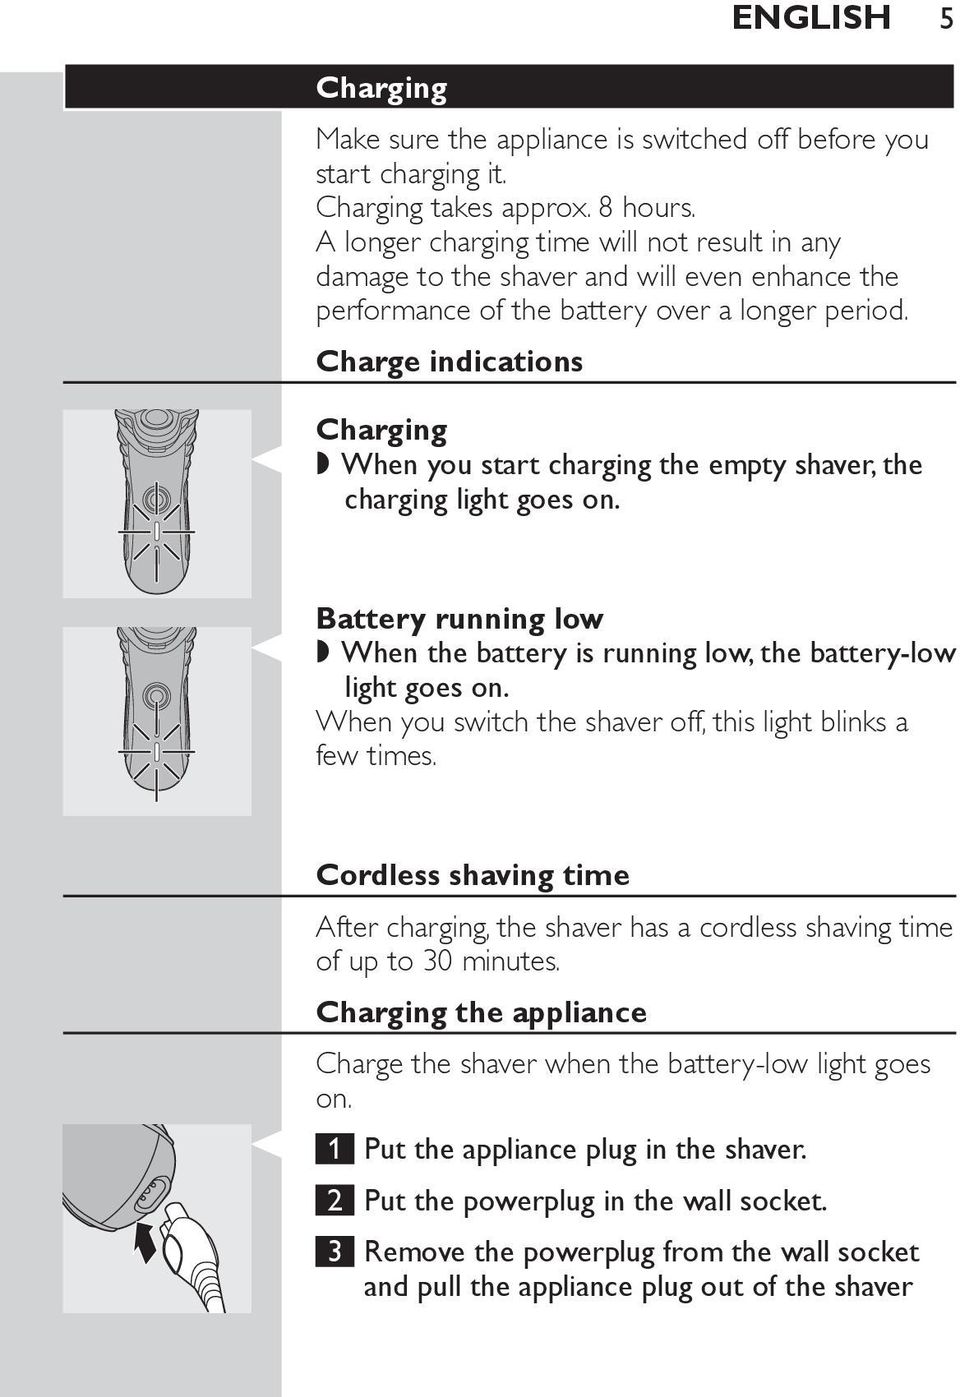 Charge indications Charging, When you start charging the empty shaver, the charging light goes on. Battery running low, When the battery is running low, the battery-low light goes on.